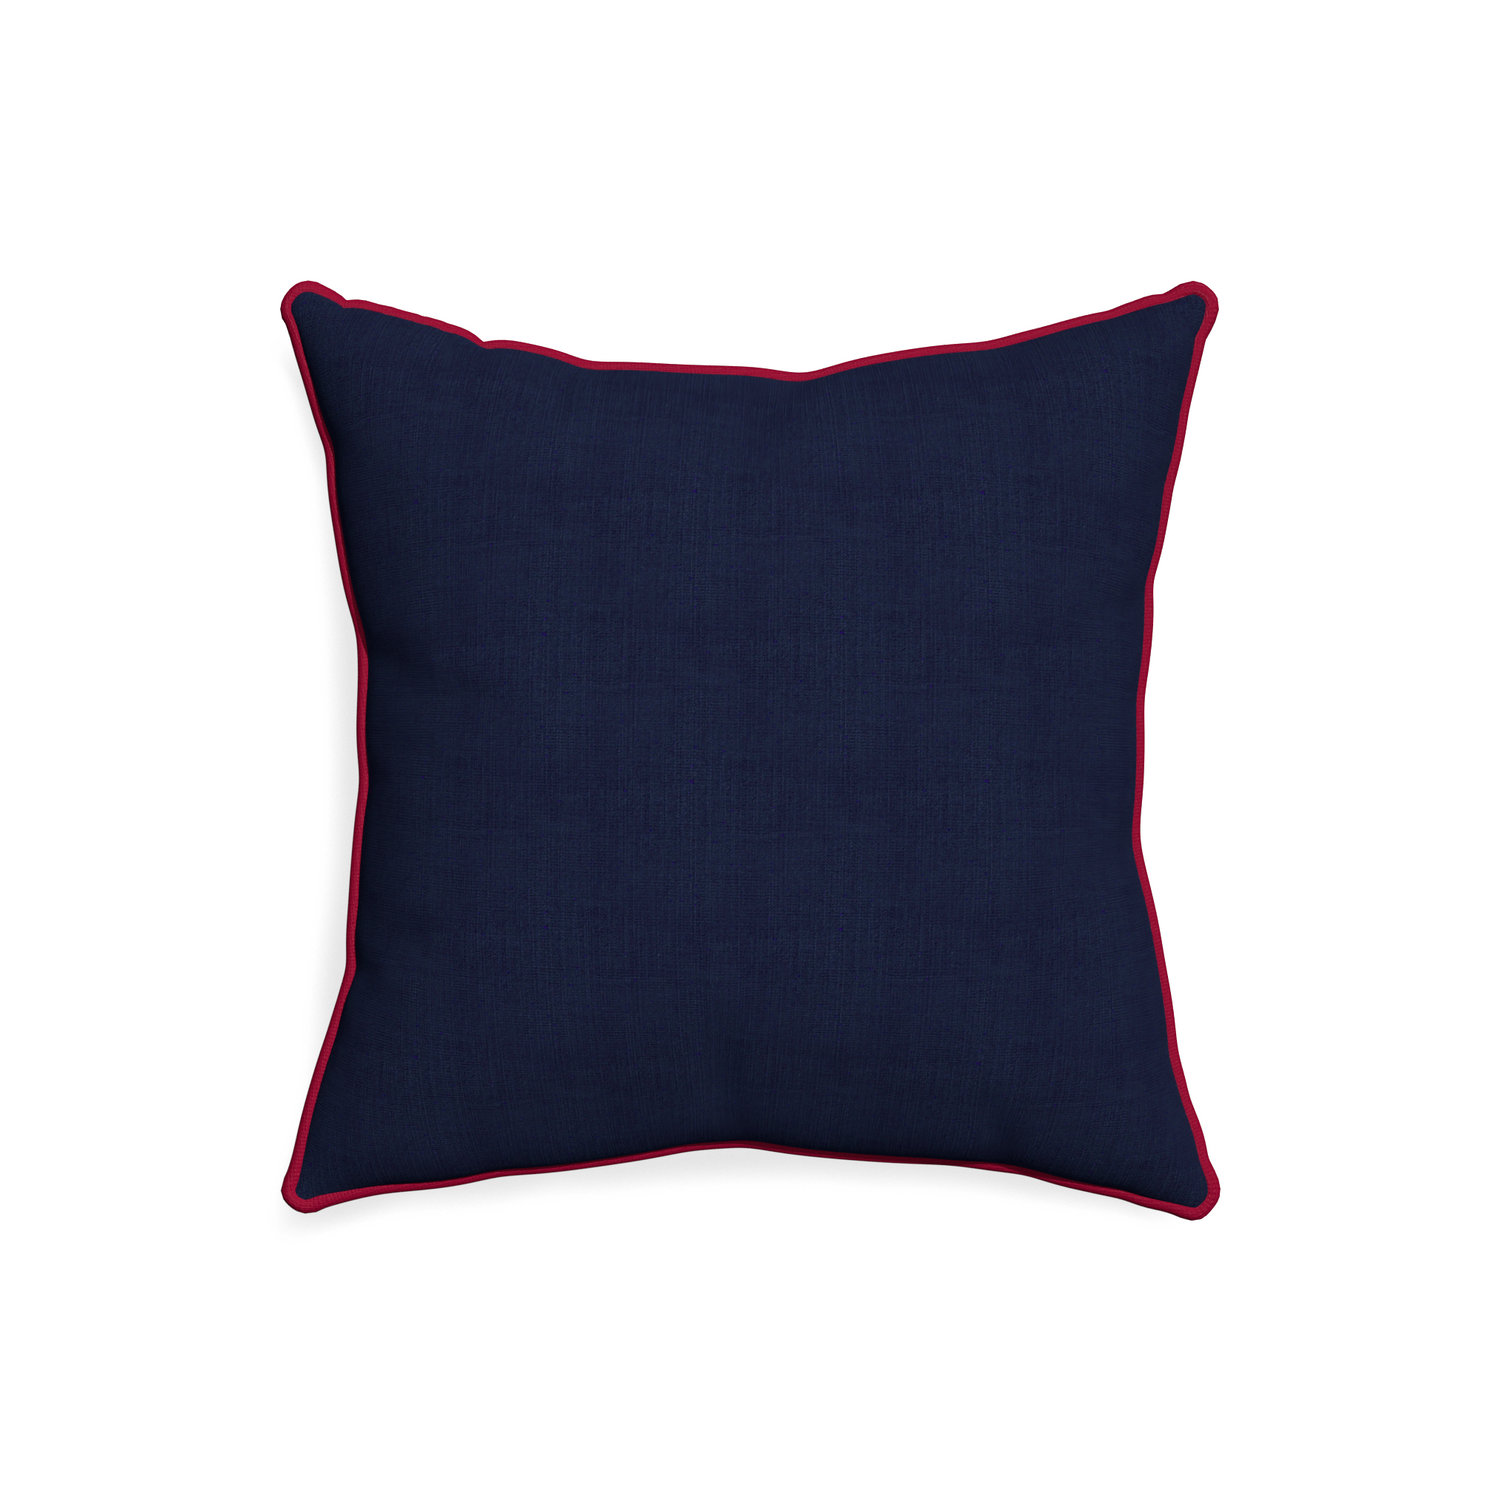 20-square midnight custom pillow with raspberry piping on white background